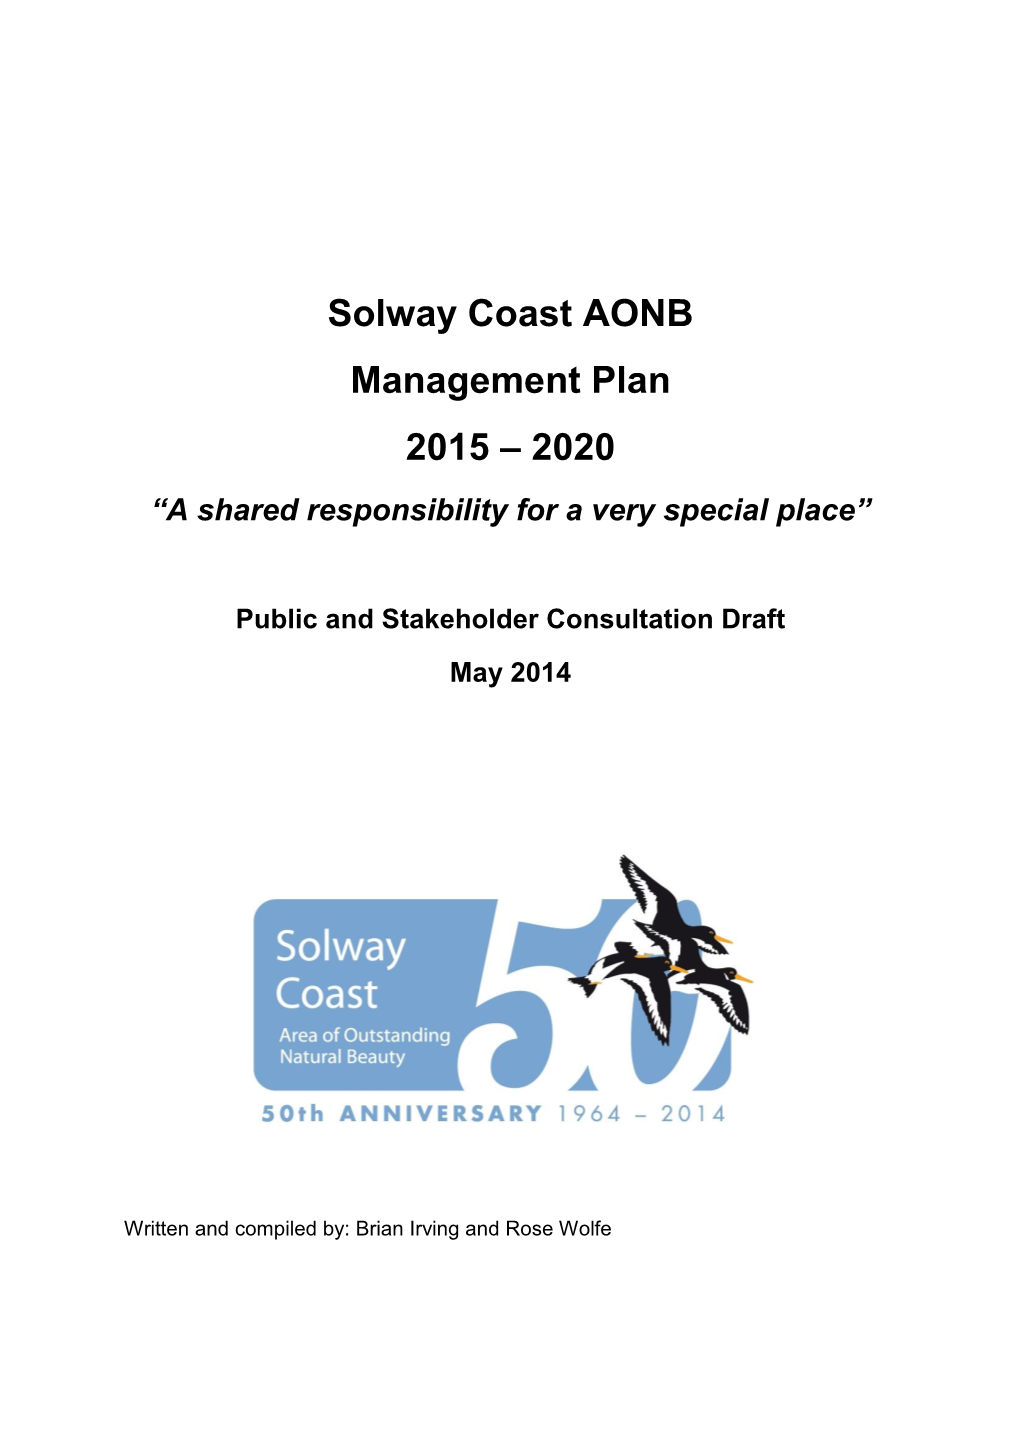 Solway Coast AONB Management Plan 2015 – 2020 “A Shared Responsibility for a Very Special Place”